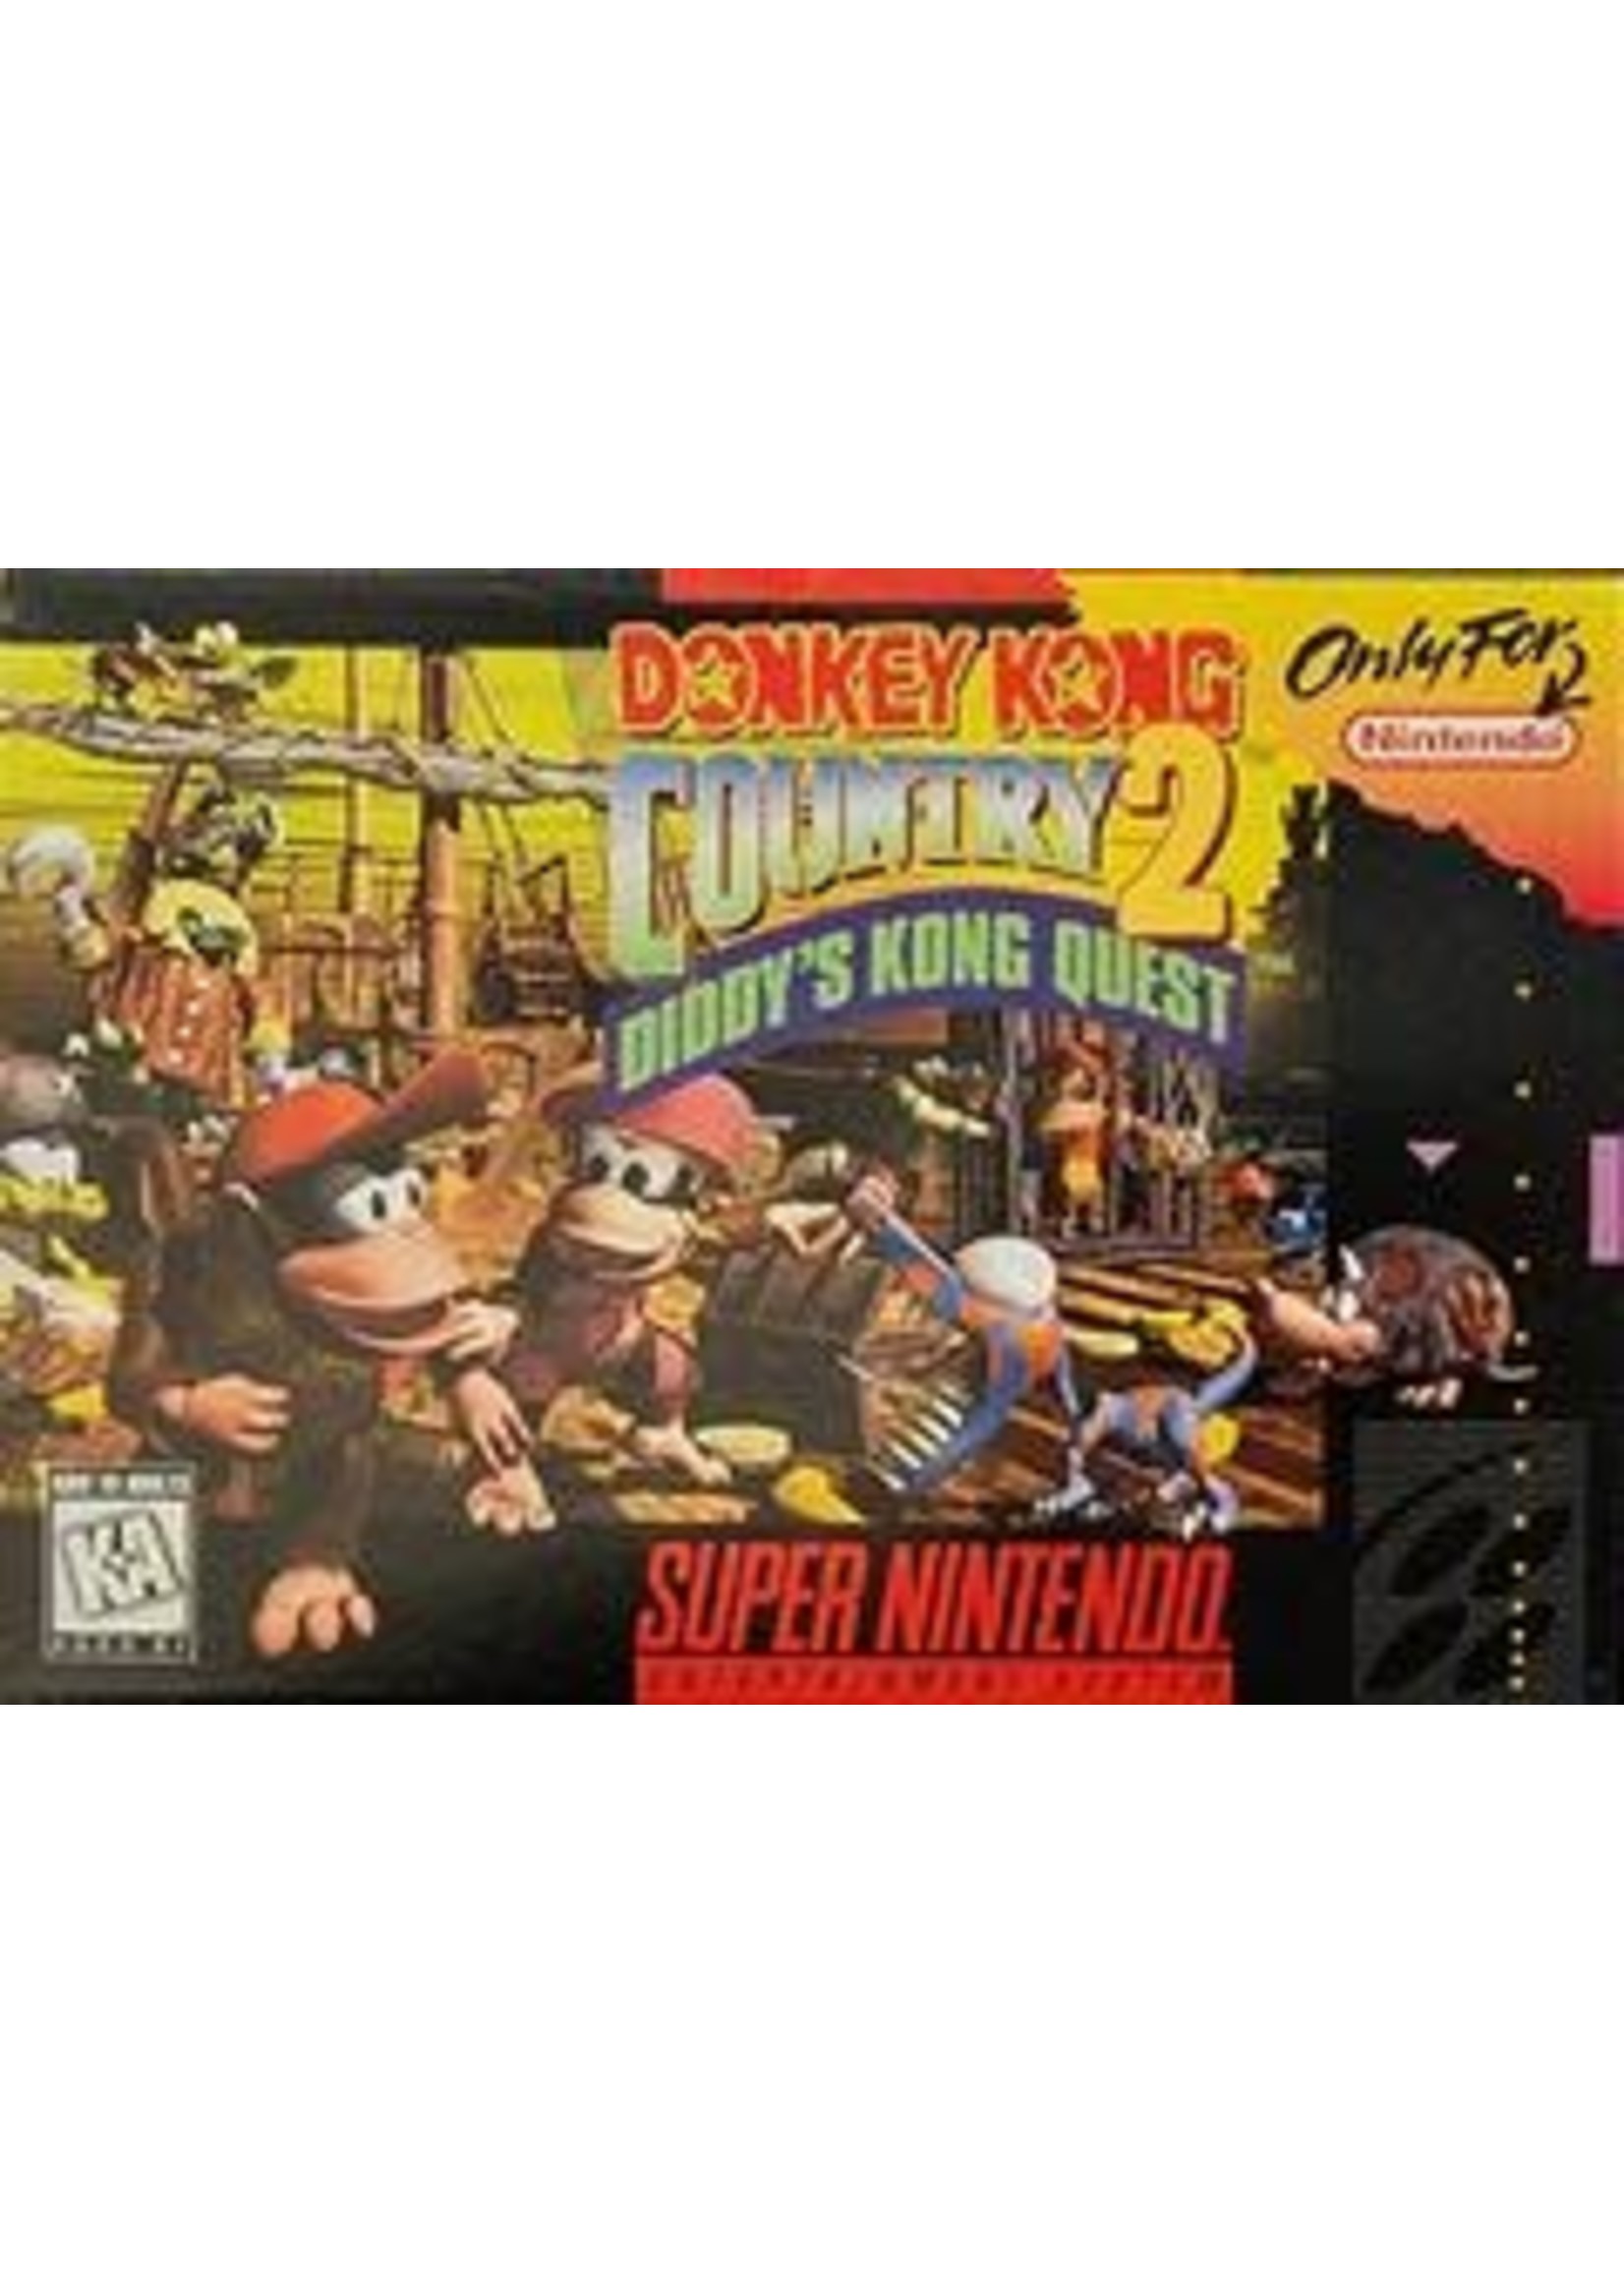 Donkey Kong Country 2 CART ONLY